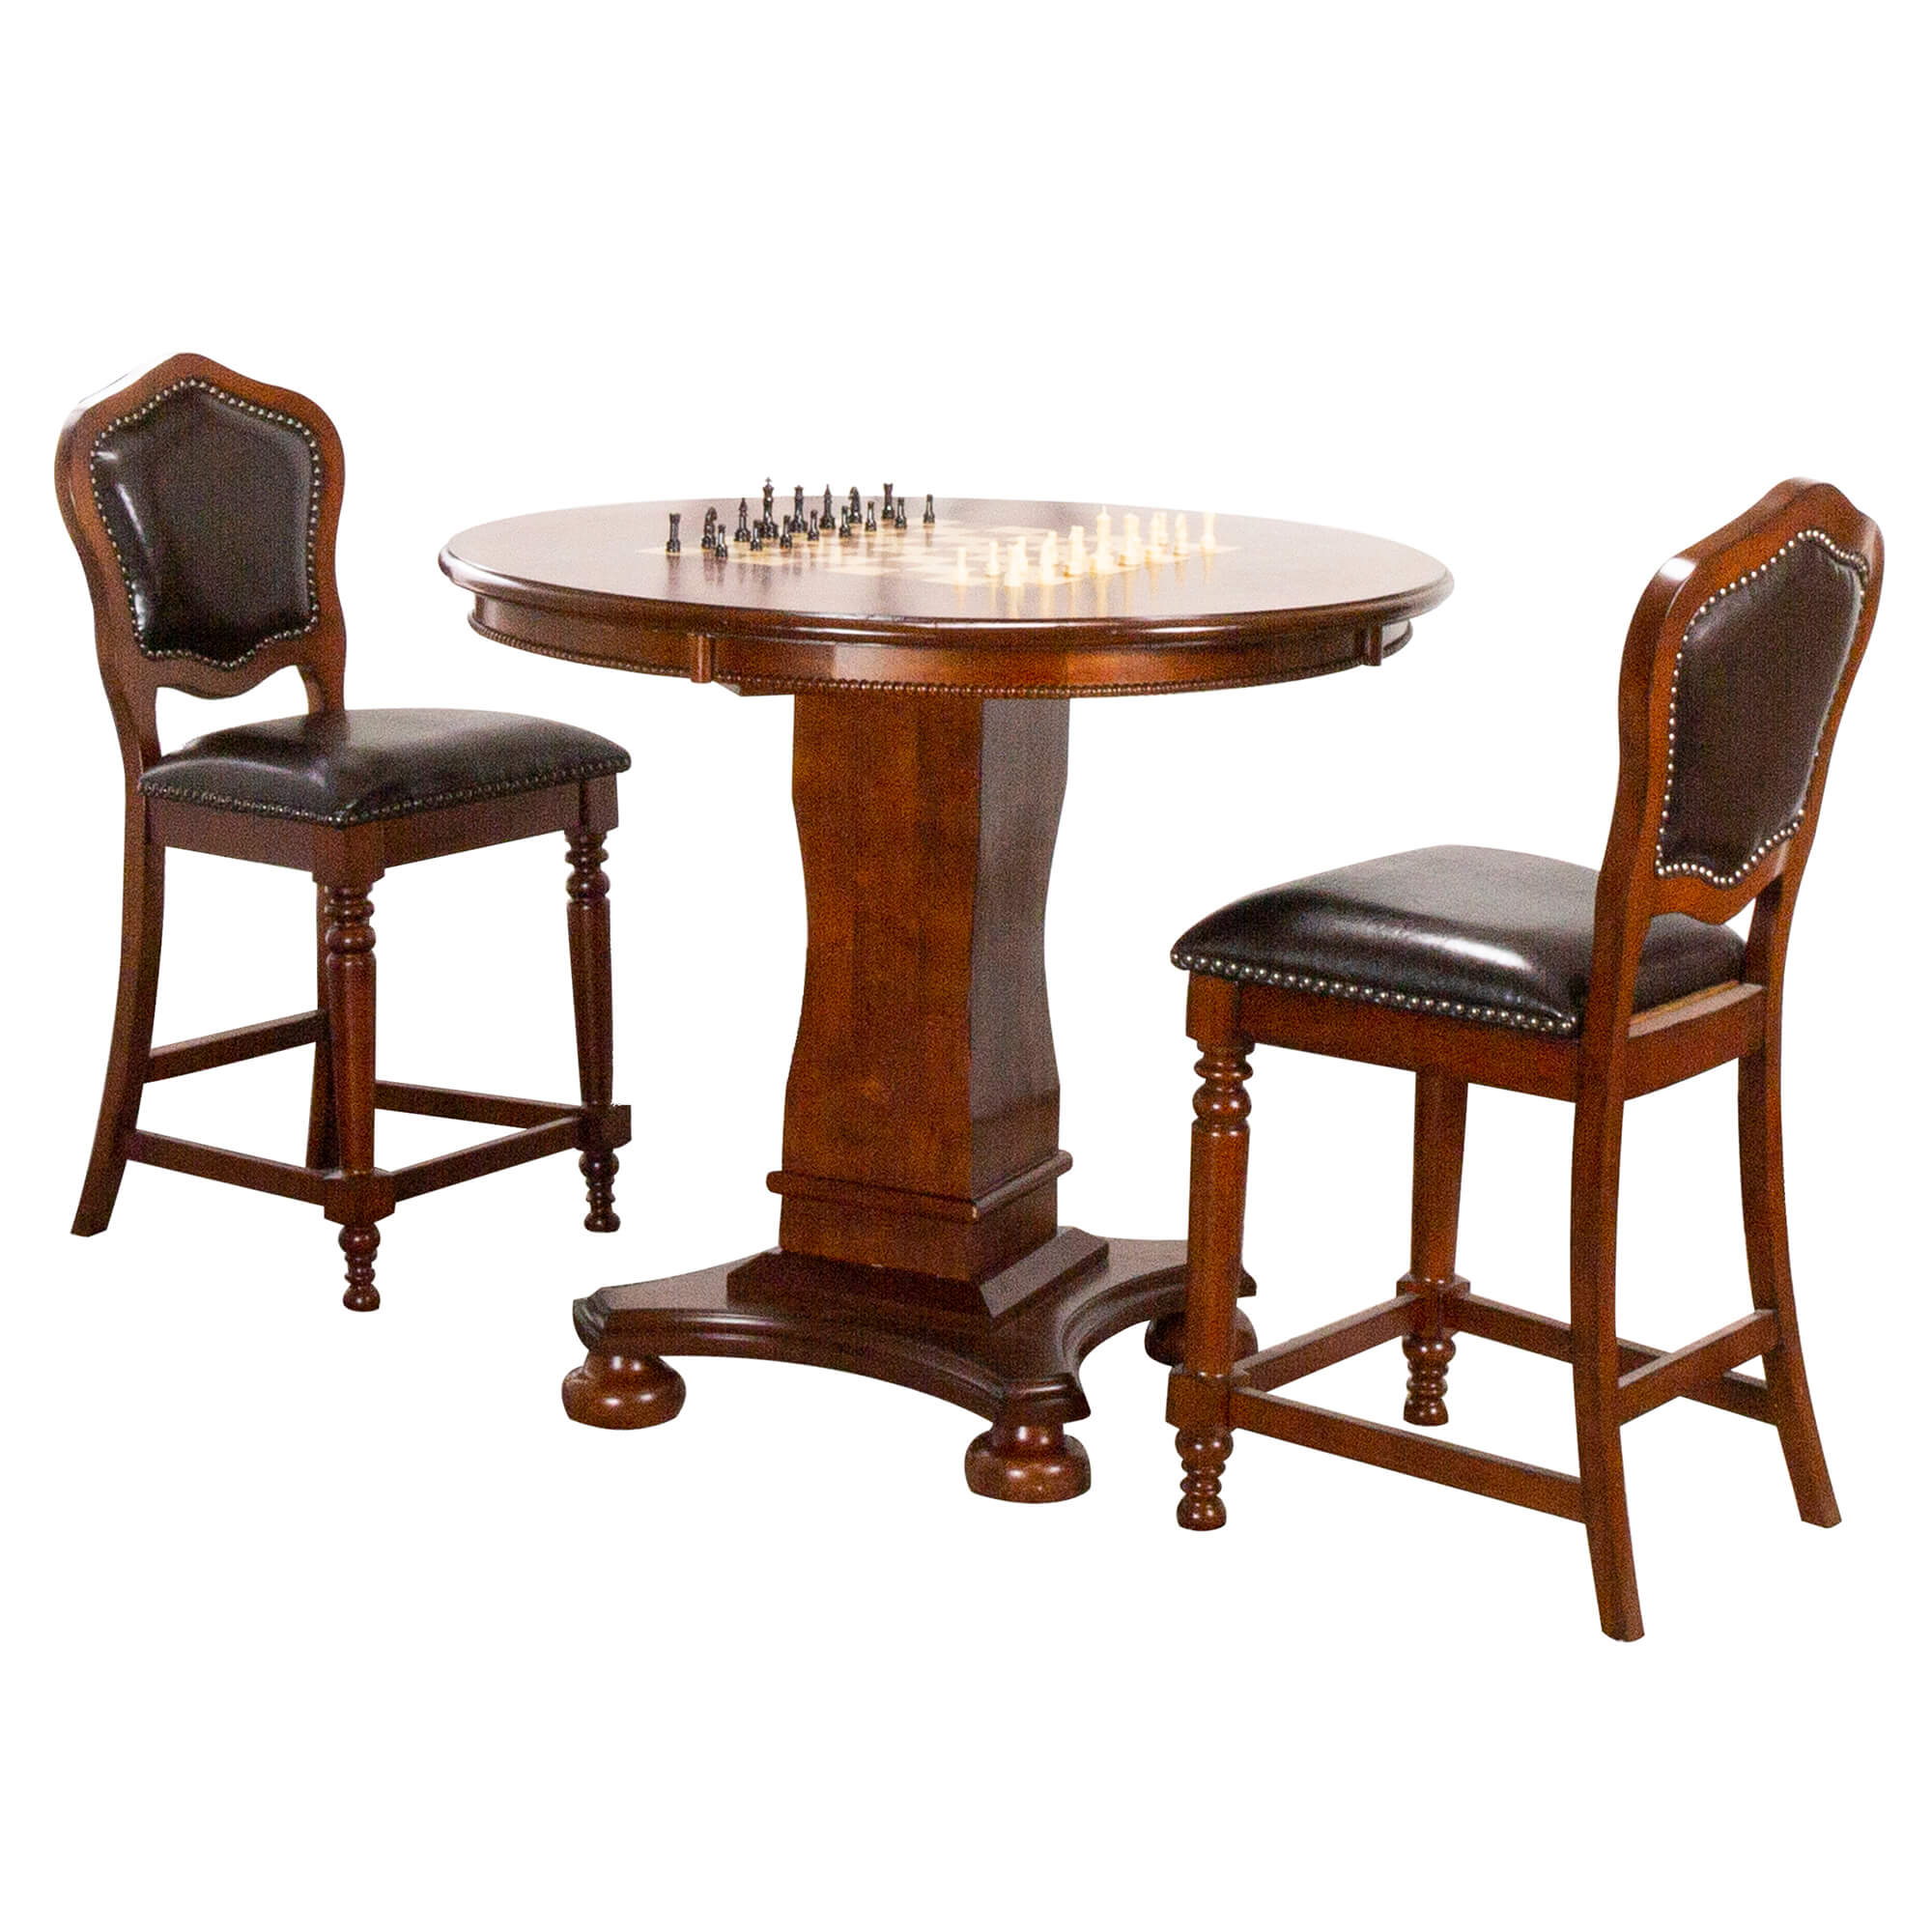 42 in. Bellagio Round Counter Height Dining with Chess & Poker Table - Reversible 3 in 1 Game Top Distressed Cherry Brown Wood - 3 Pieces -  Sunset Trading, SU476230